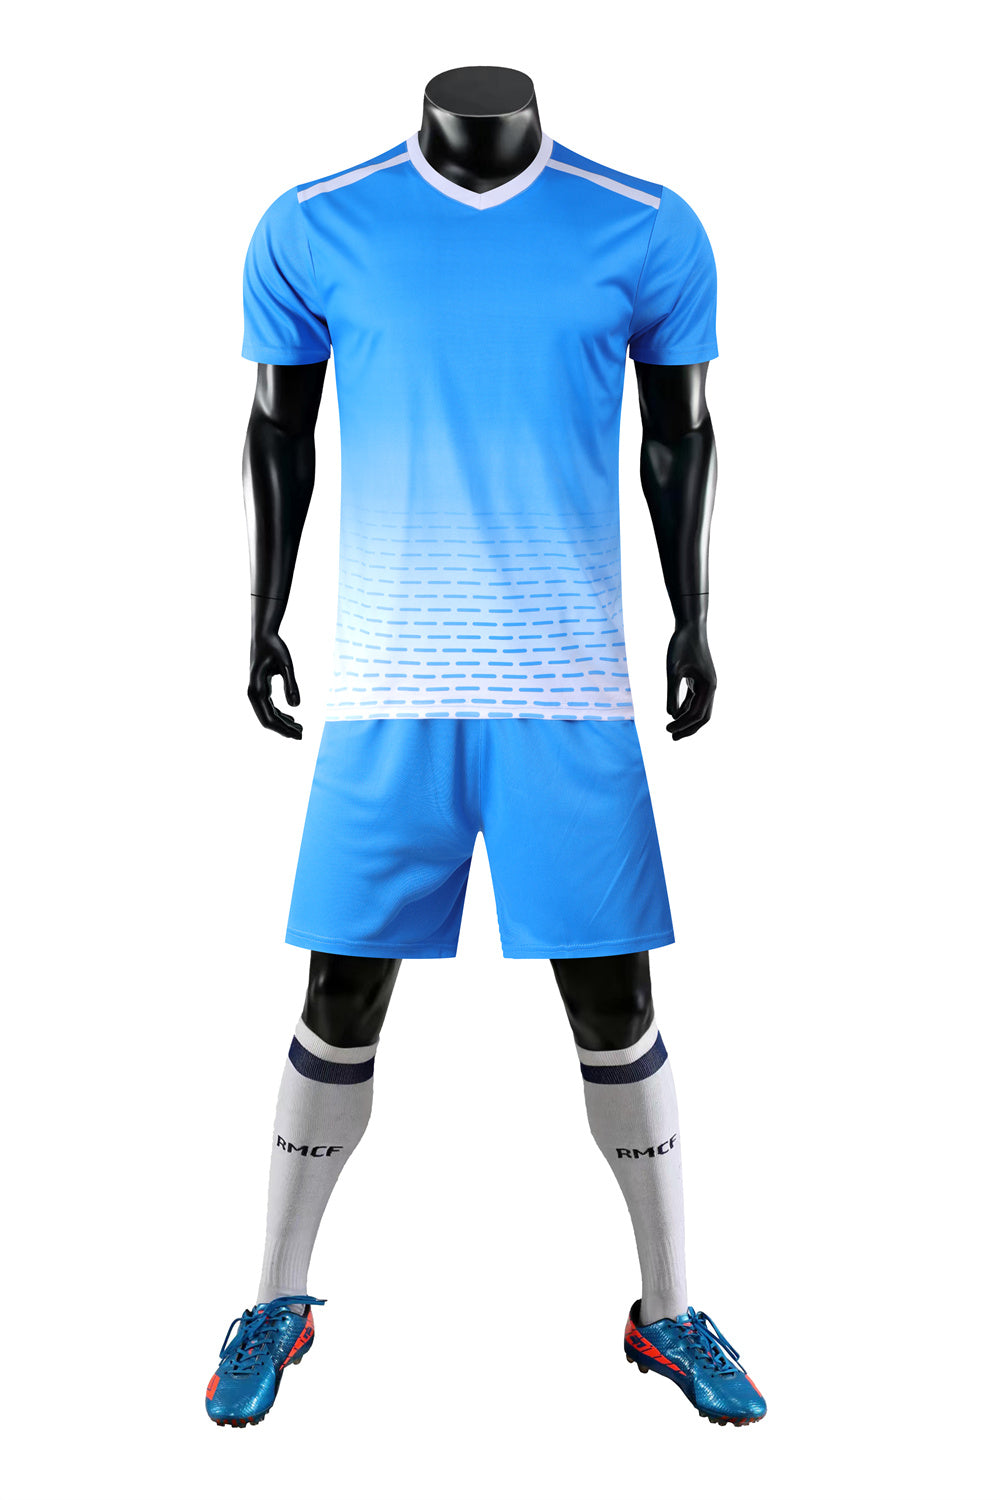 Customize instock High Quality Quick-drying uniforms print with team name , player and number.  sport training jerseys&shorts 907#